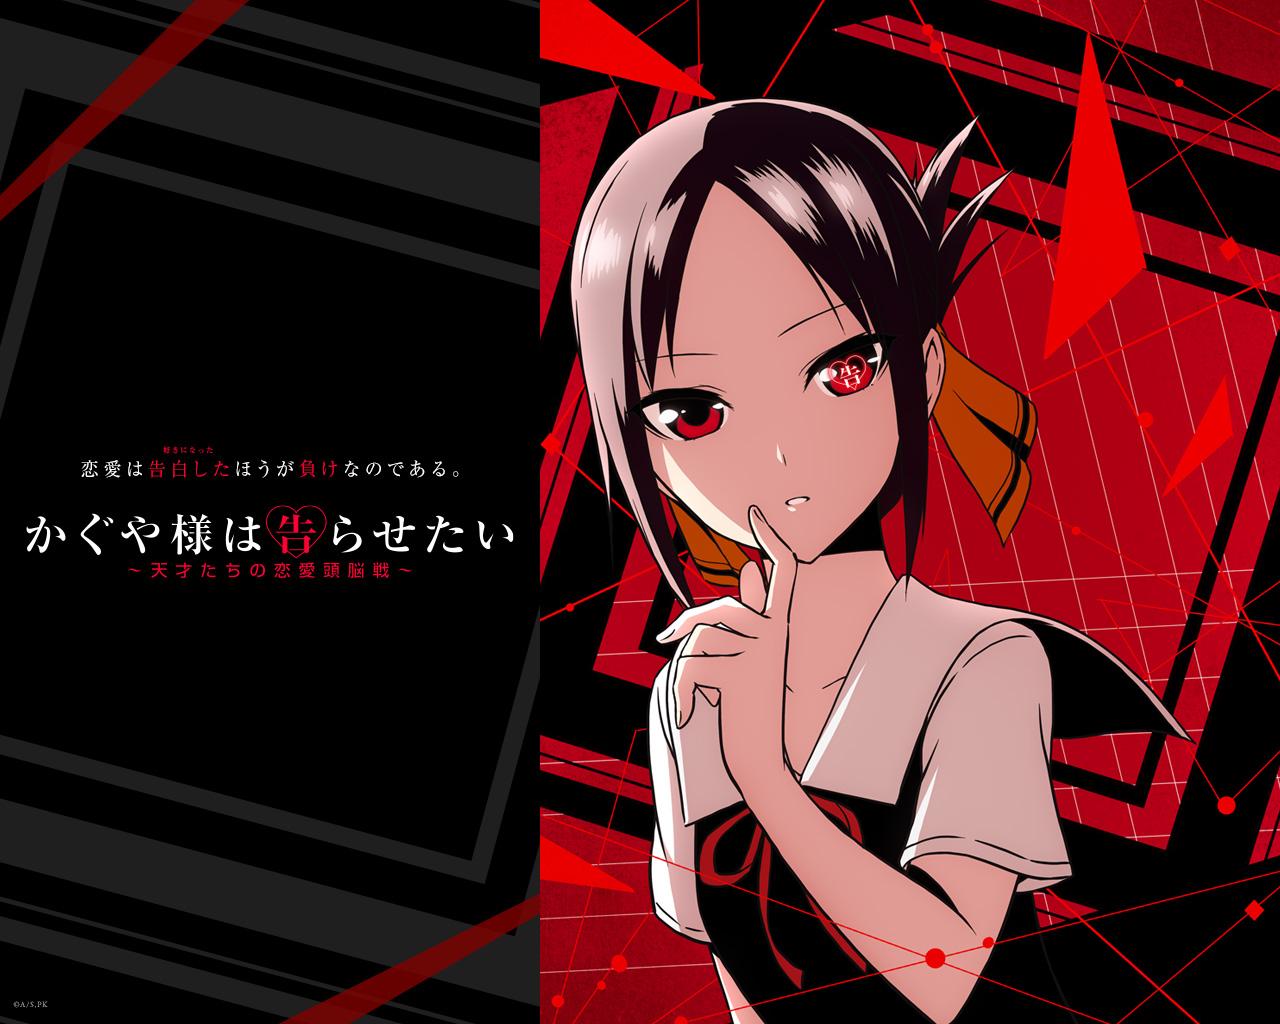 Why Don't You Get Kaguya Sama Wallpaper Officially!